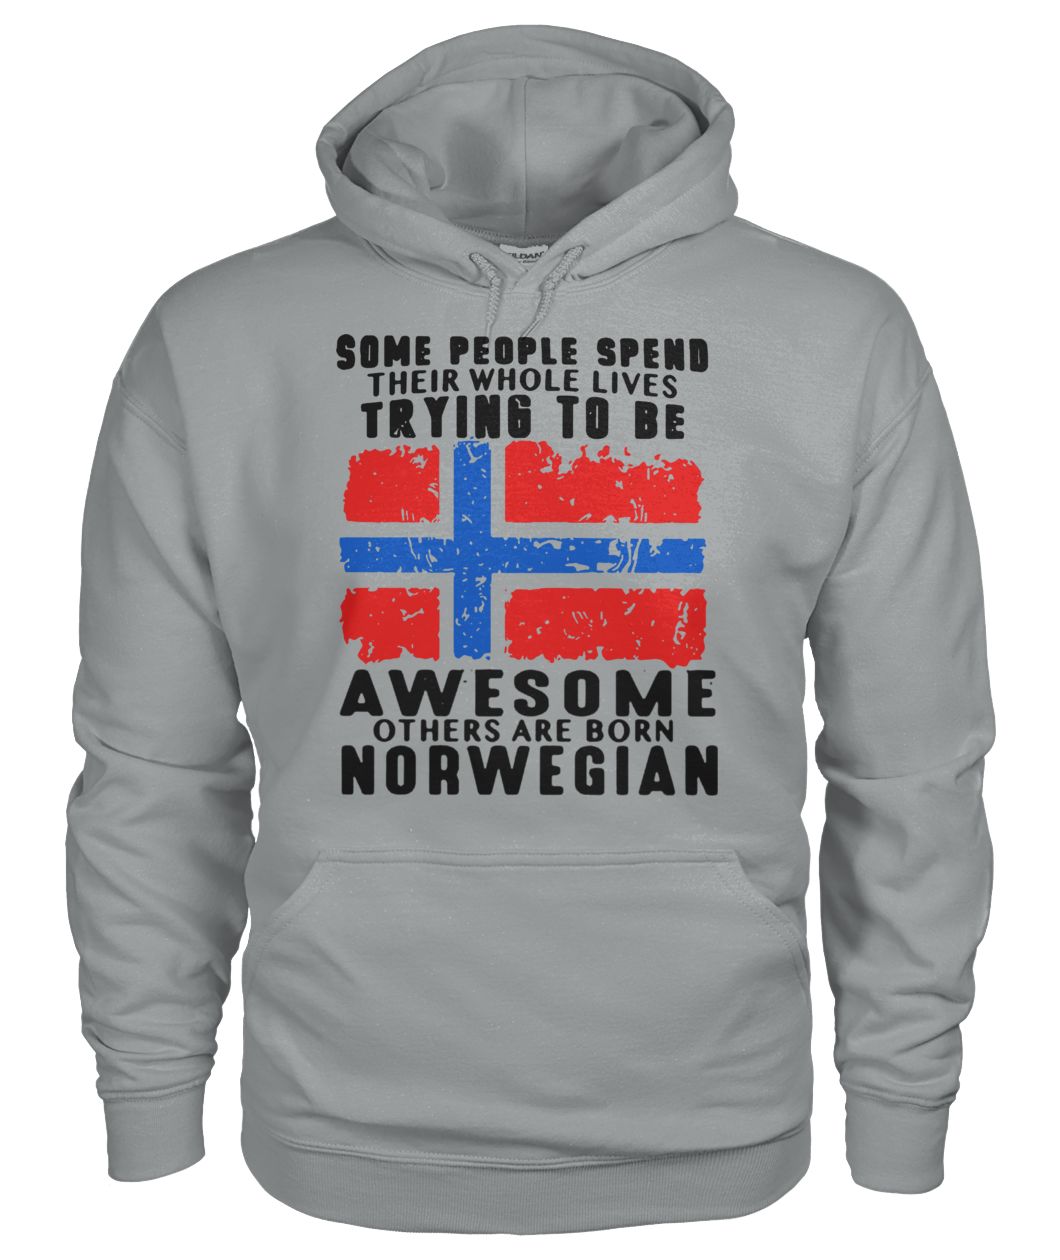 Some people spend their whole lives trying to be awesome others are born norwegian gildan hoodie